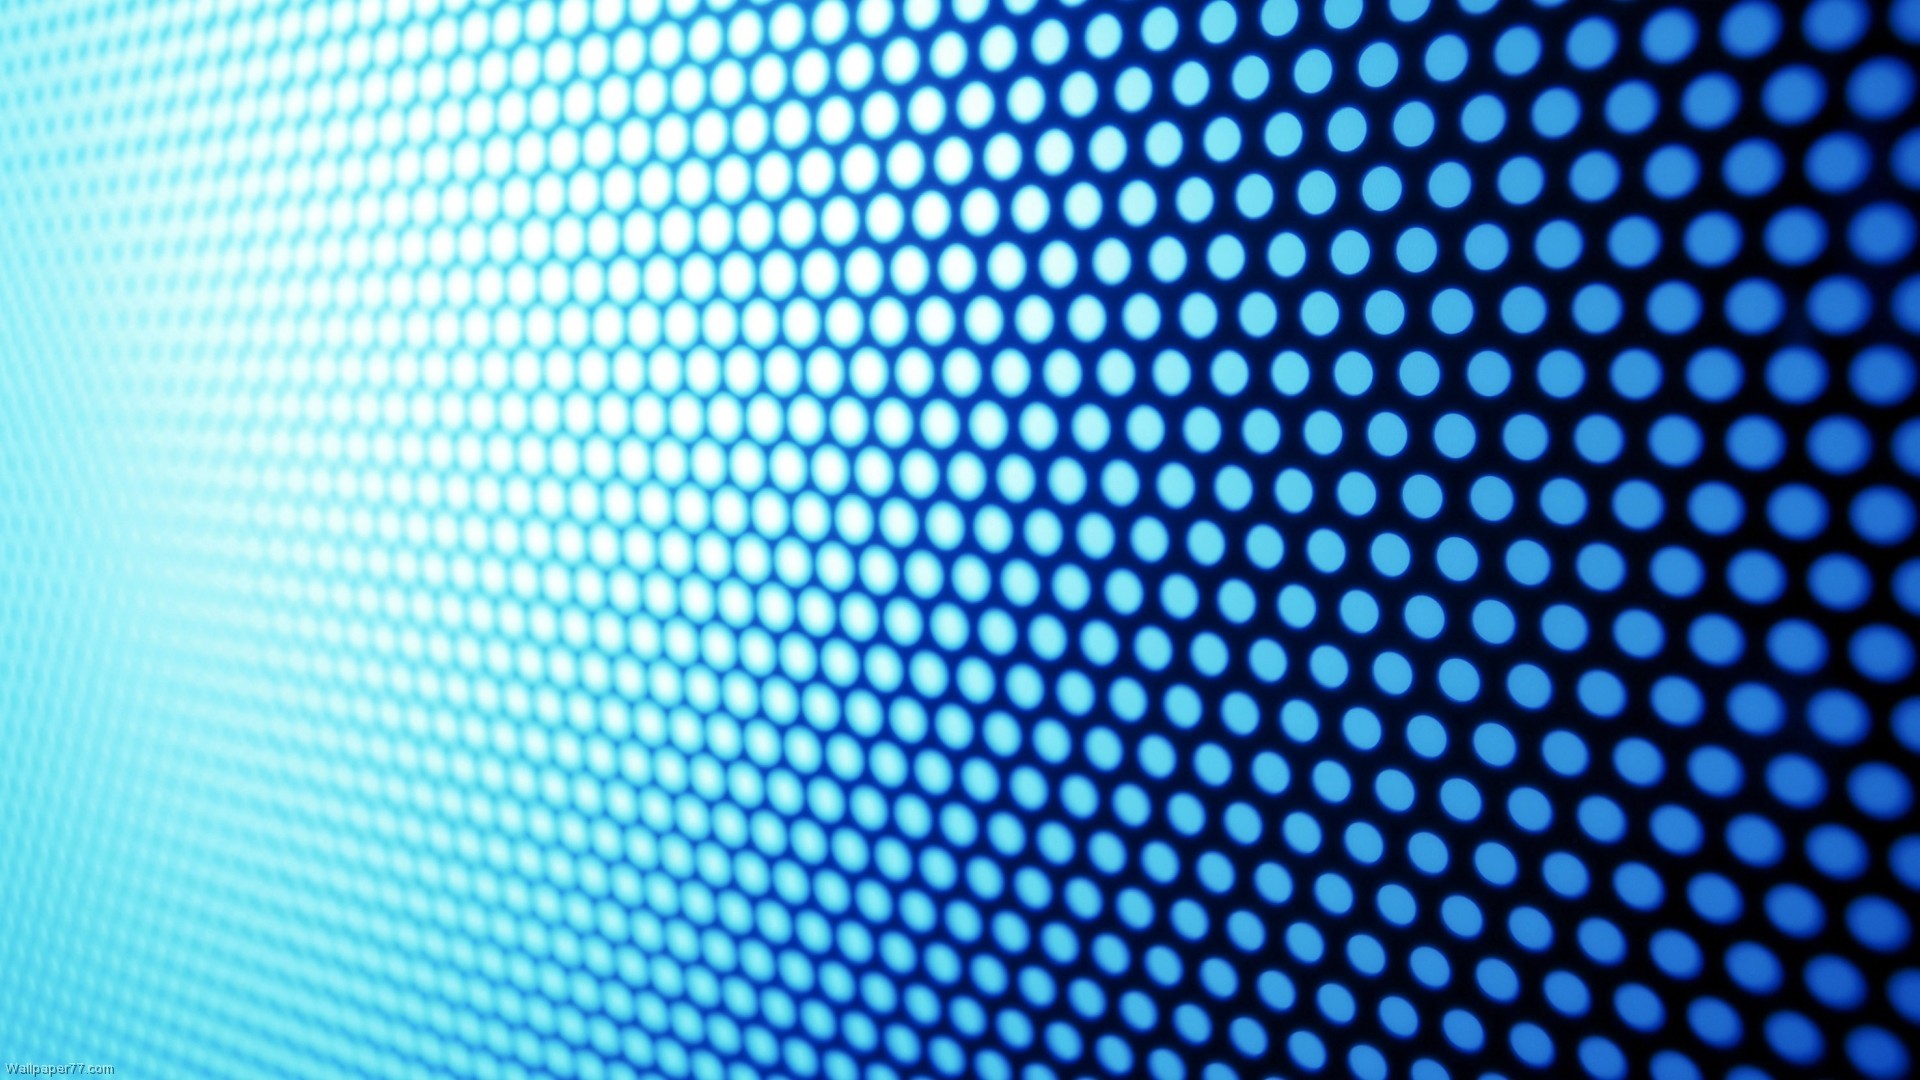 Blue Dots Pattern – See more Beautiful background images for video at backgroundimages